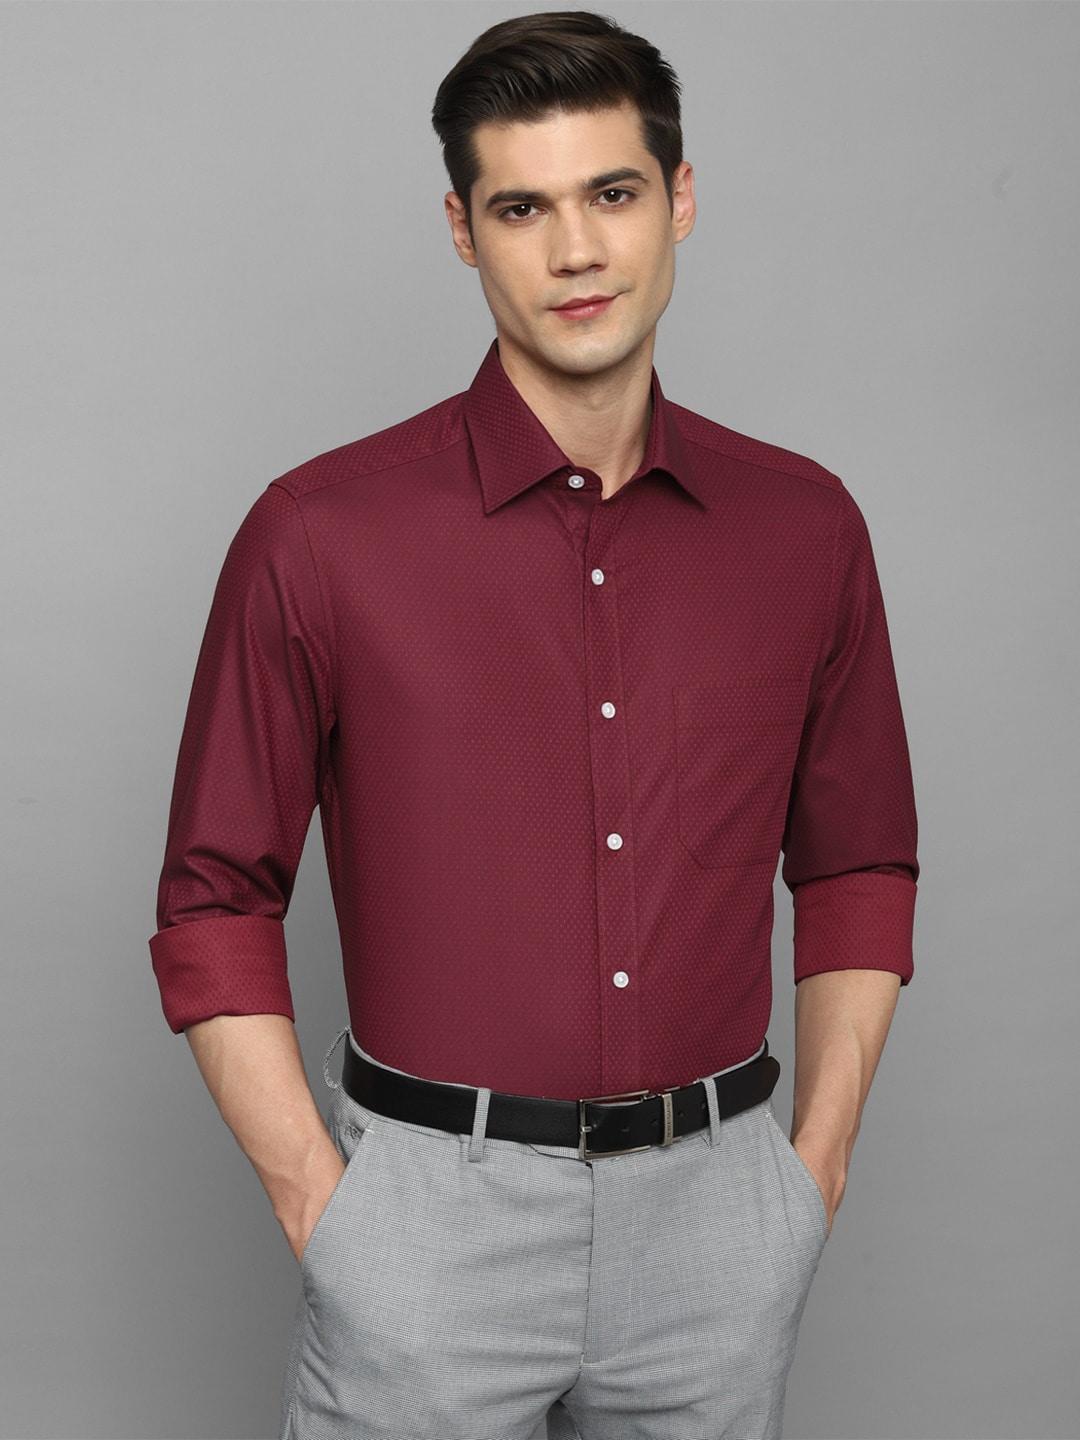 louis philippe spread collar opaque pure cotton formal shirt